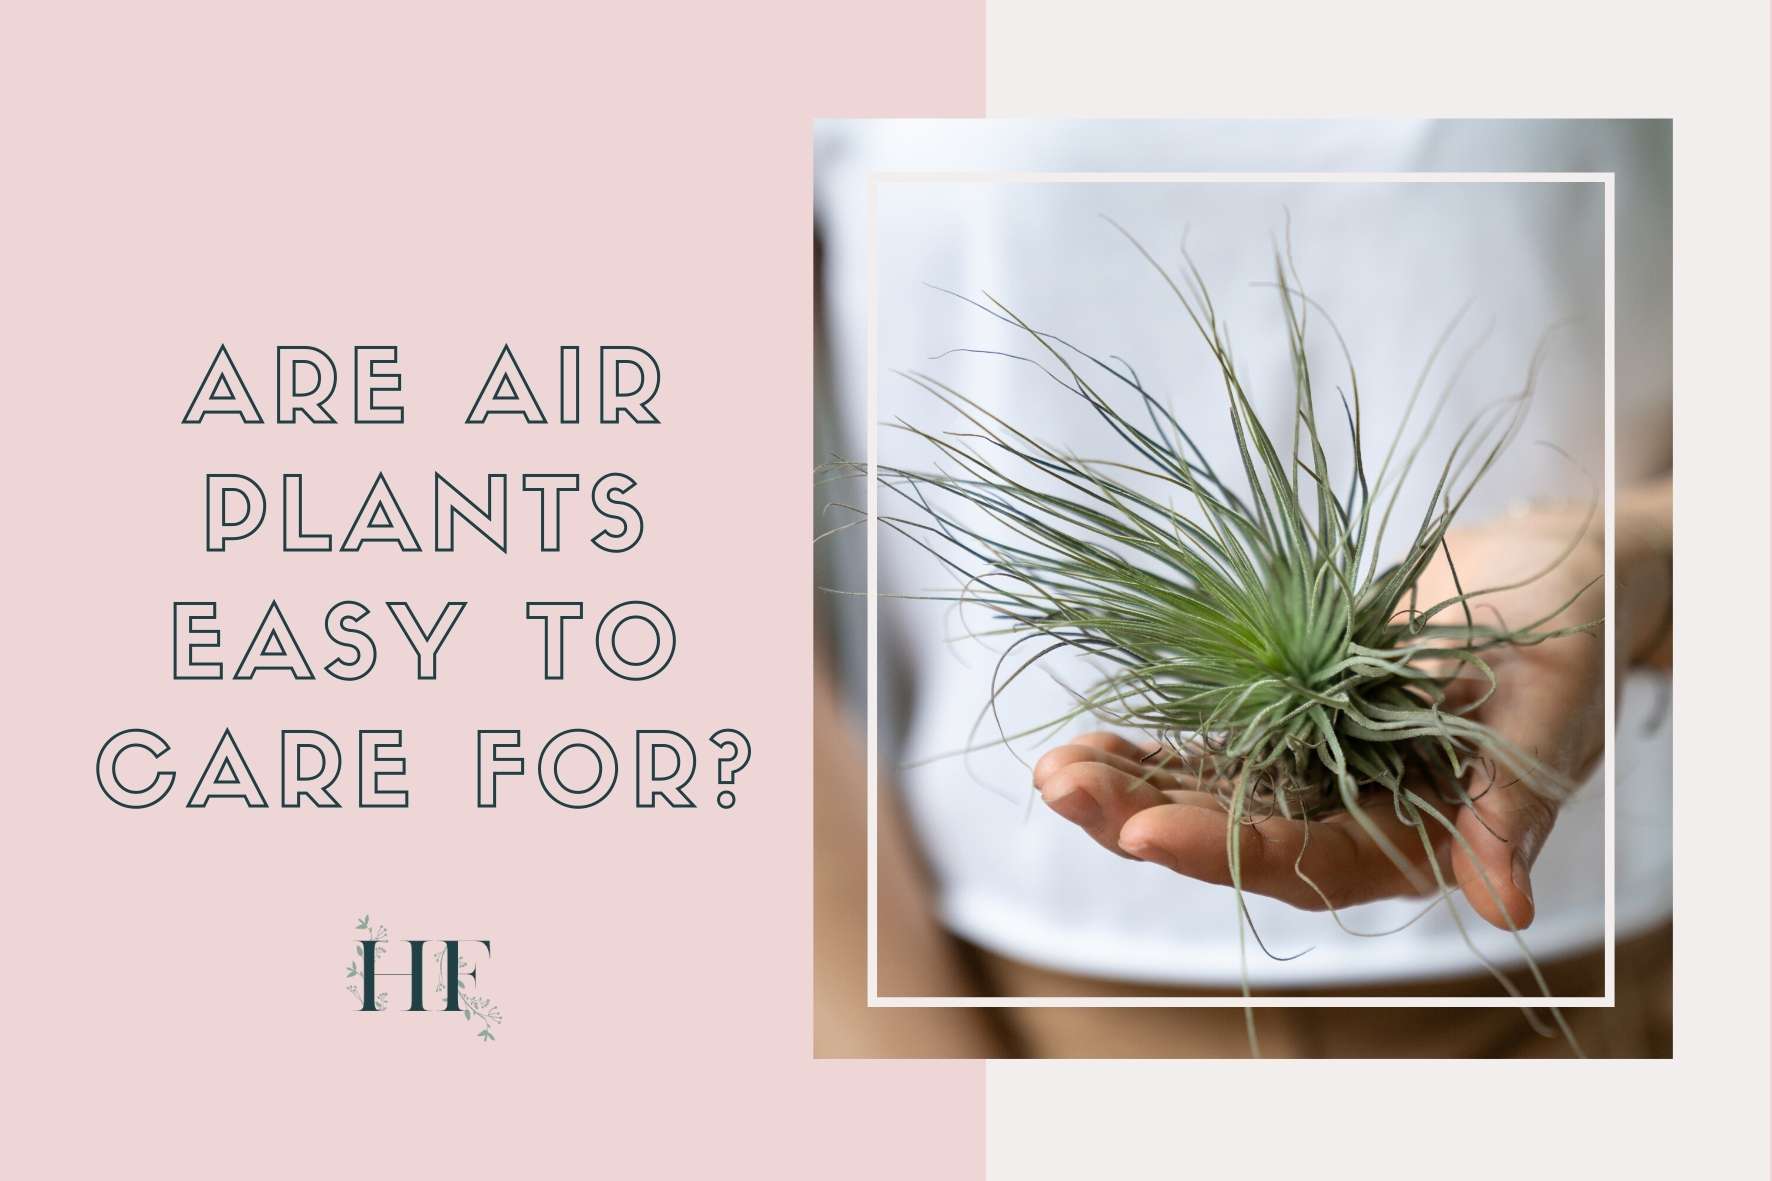 are-air-plants-easy-to-care-for